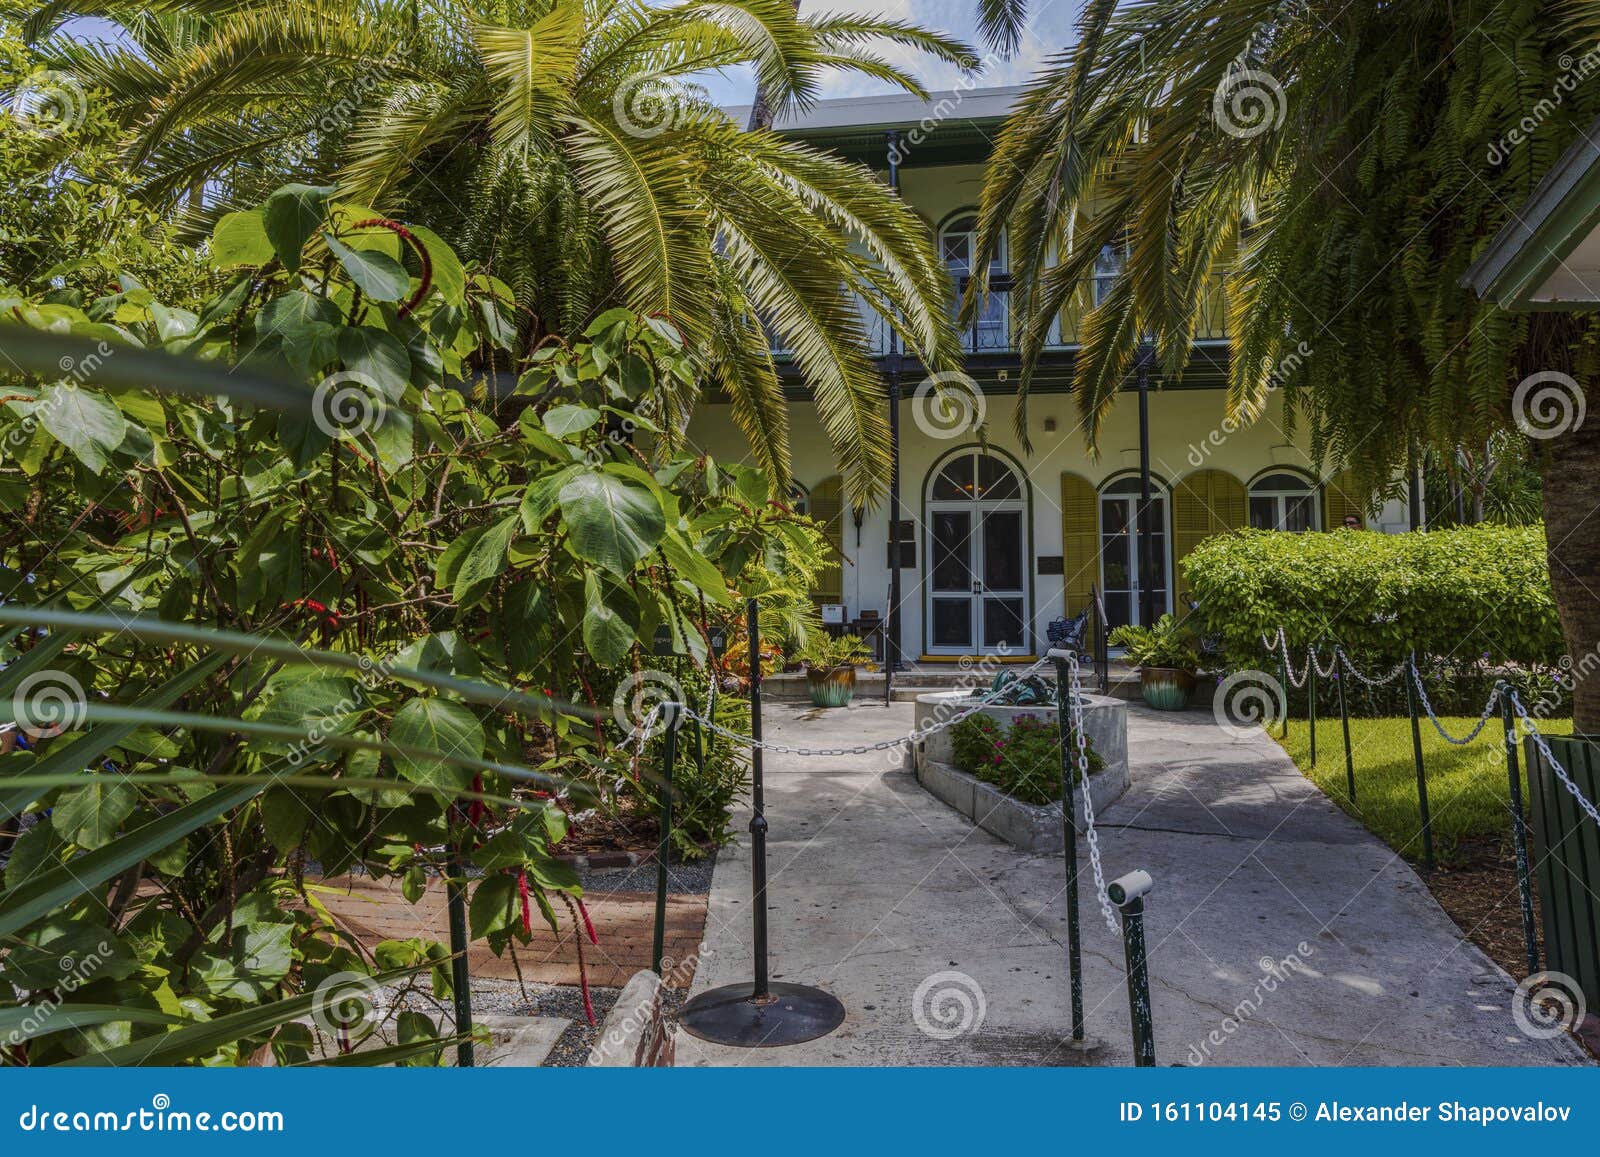 view on the ernest hemingway home and museum. beautiful green trees at the entrance checkpoint. usa. key west.